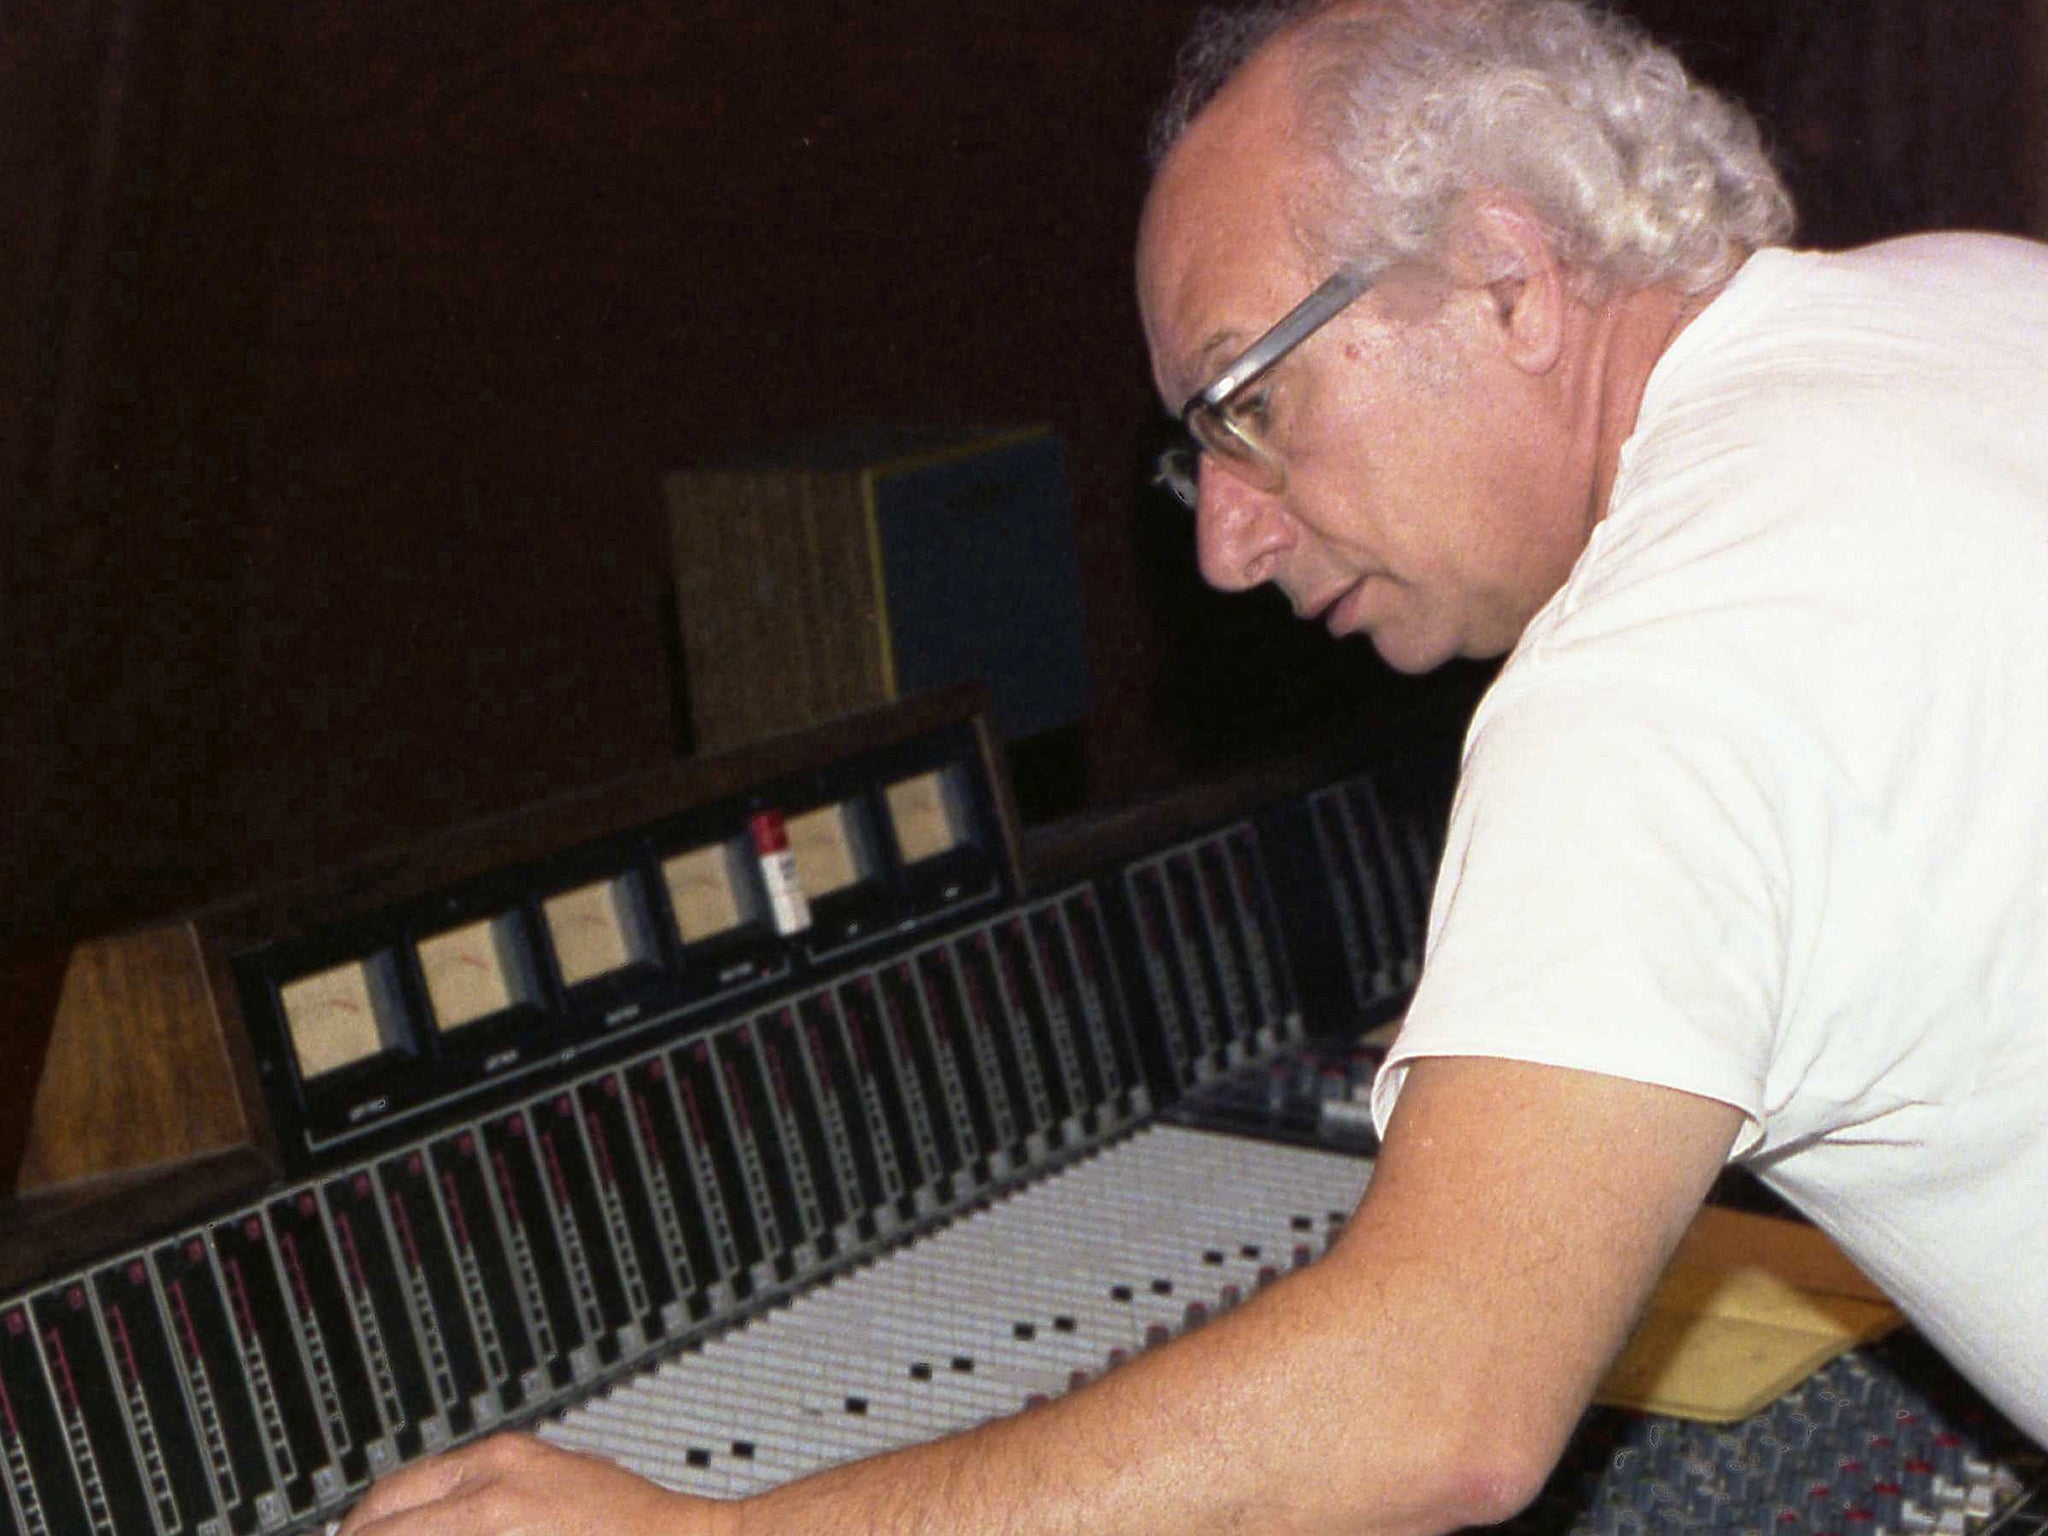 Matassa at the controls in 1979: he started with a basic
set-up in the back of his family’s shop